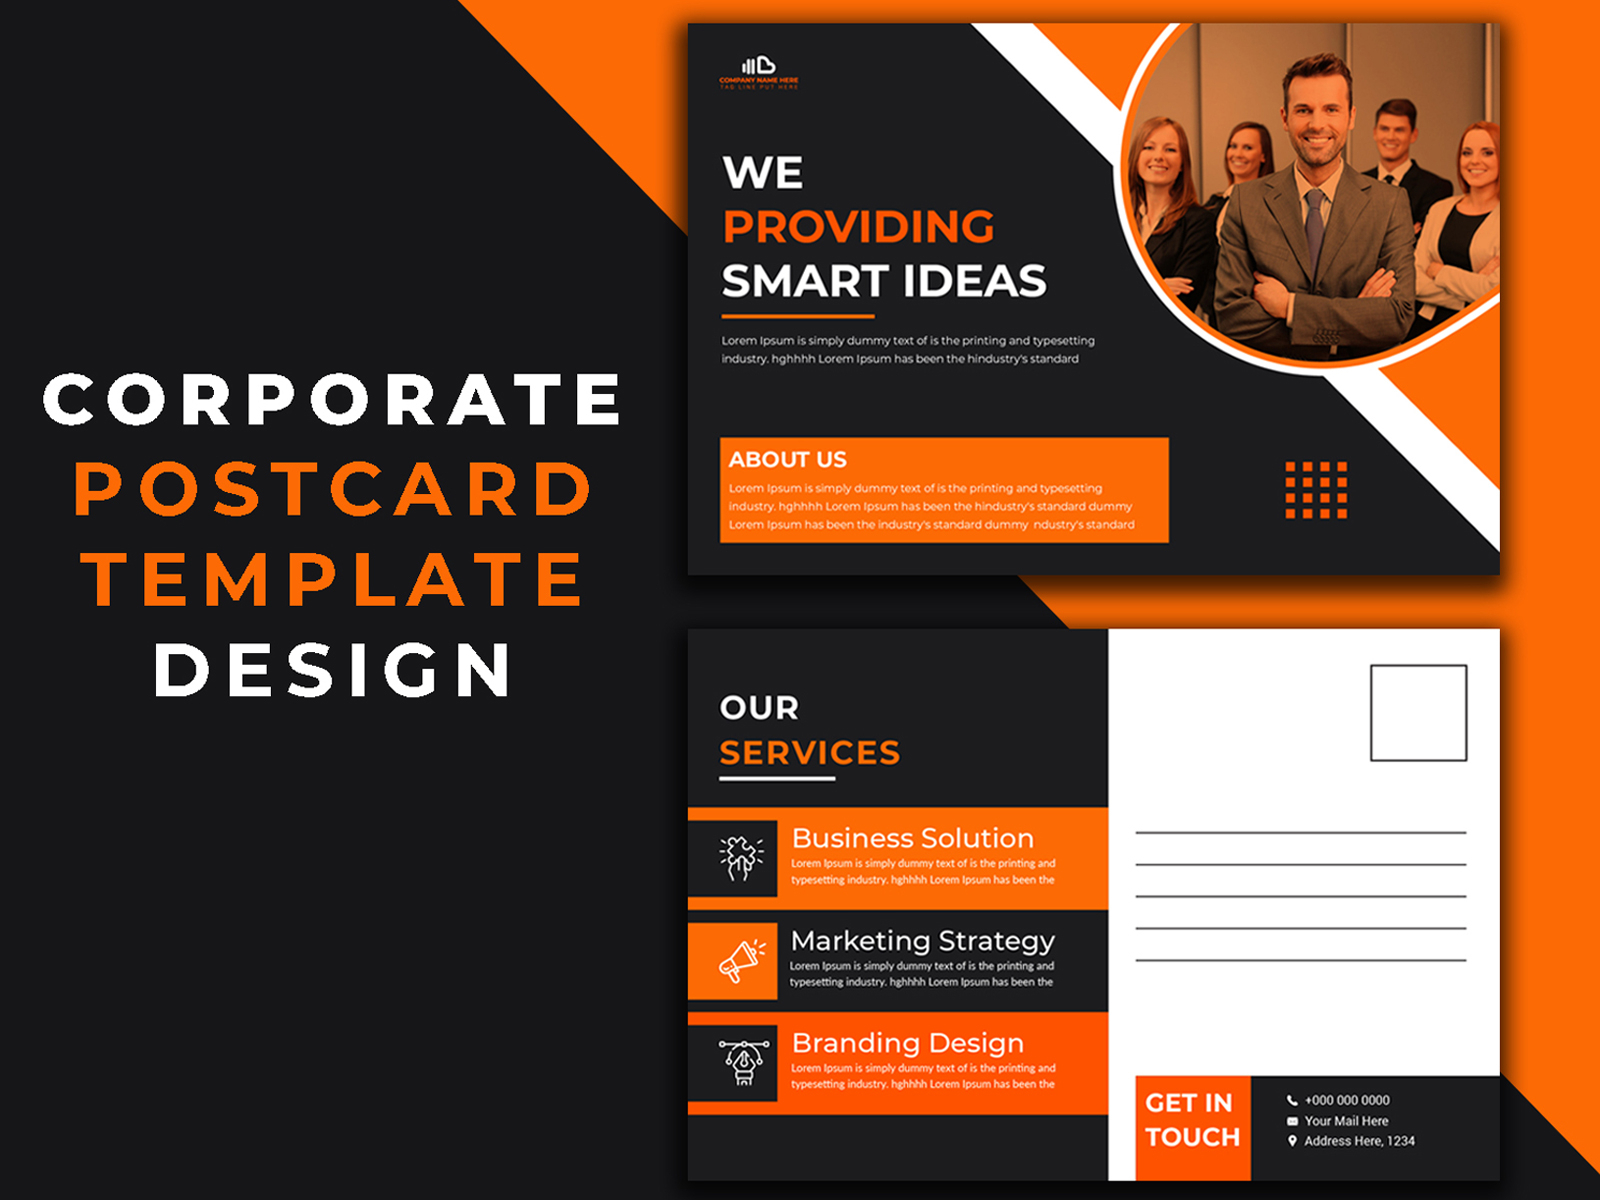 Corporate Postcard Template Design by Rasel